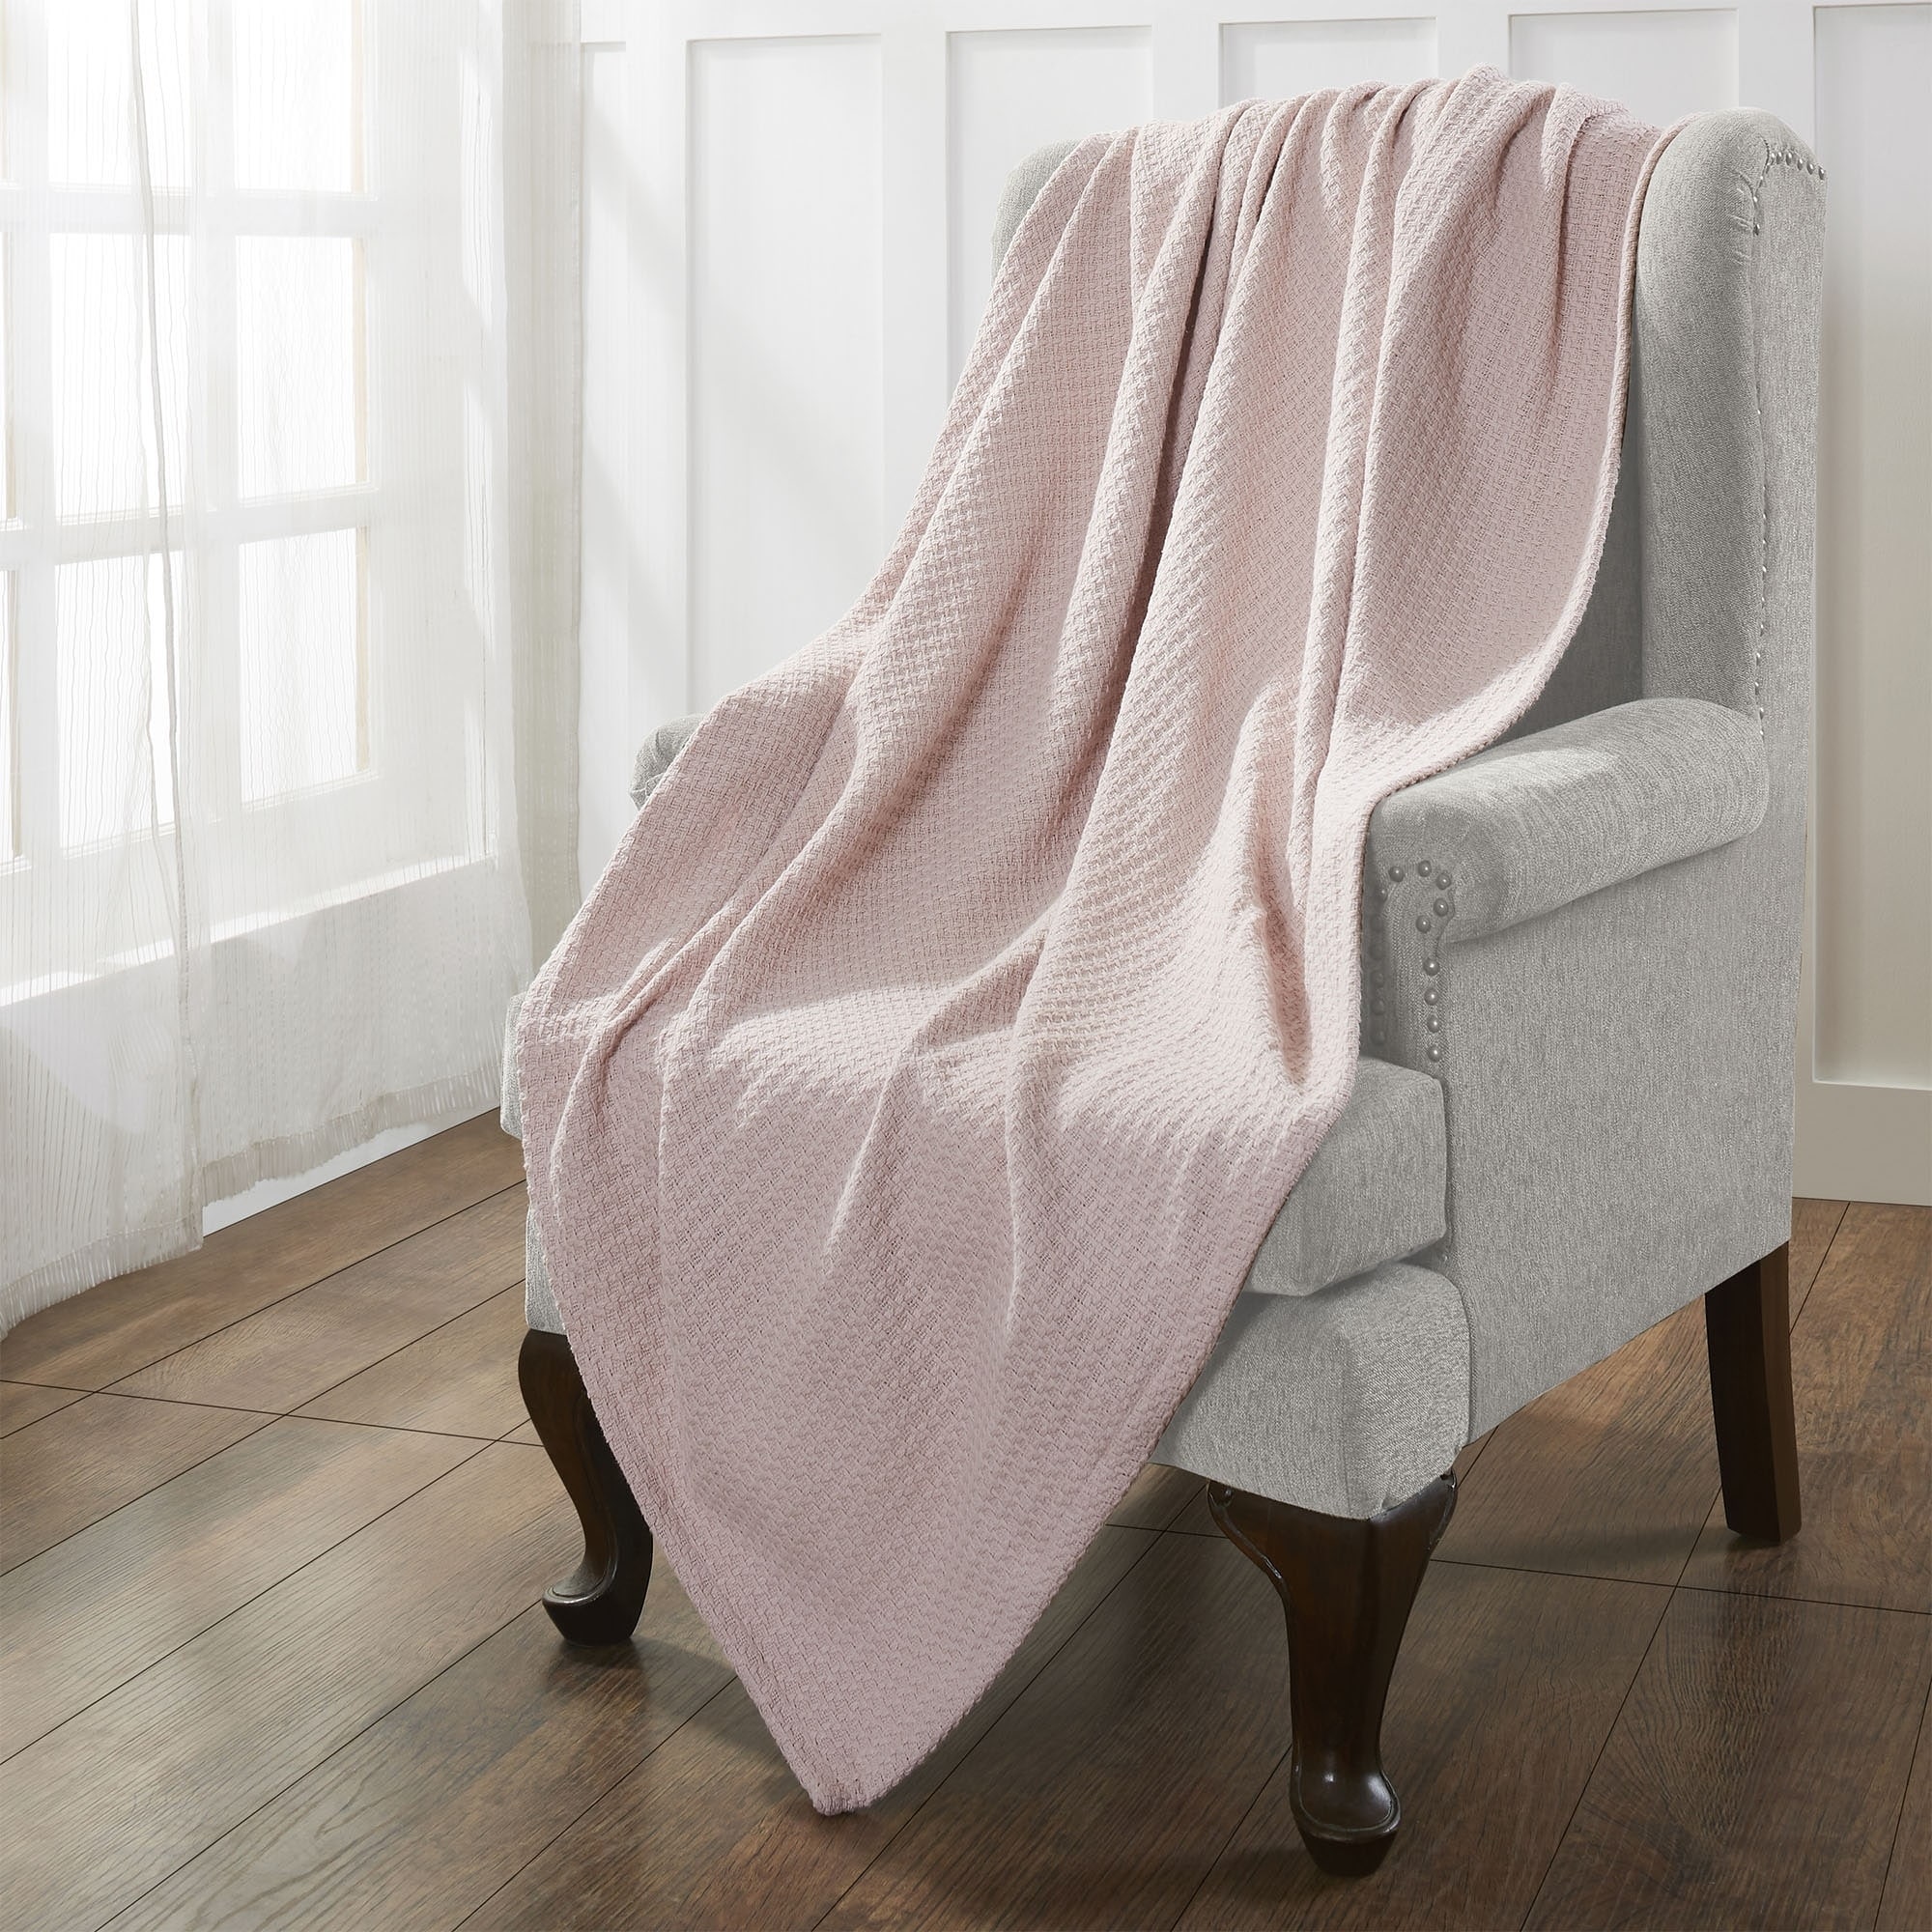 Modern Threads 100-Percent Cotton Thermal Blanket - Overstock - 22333839